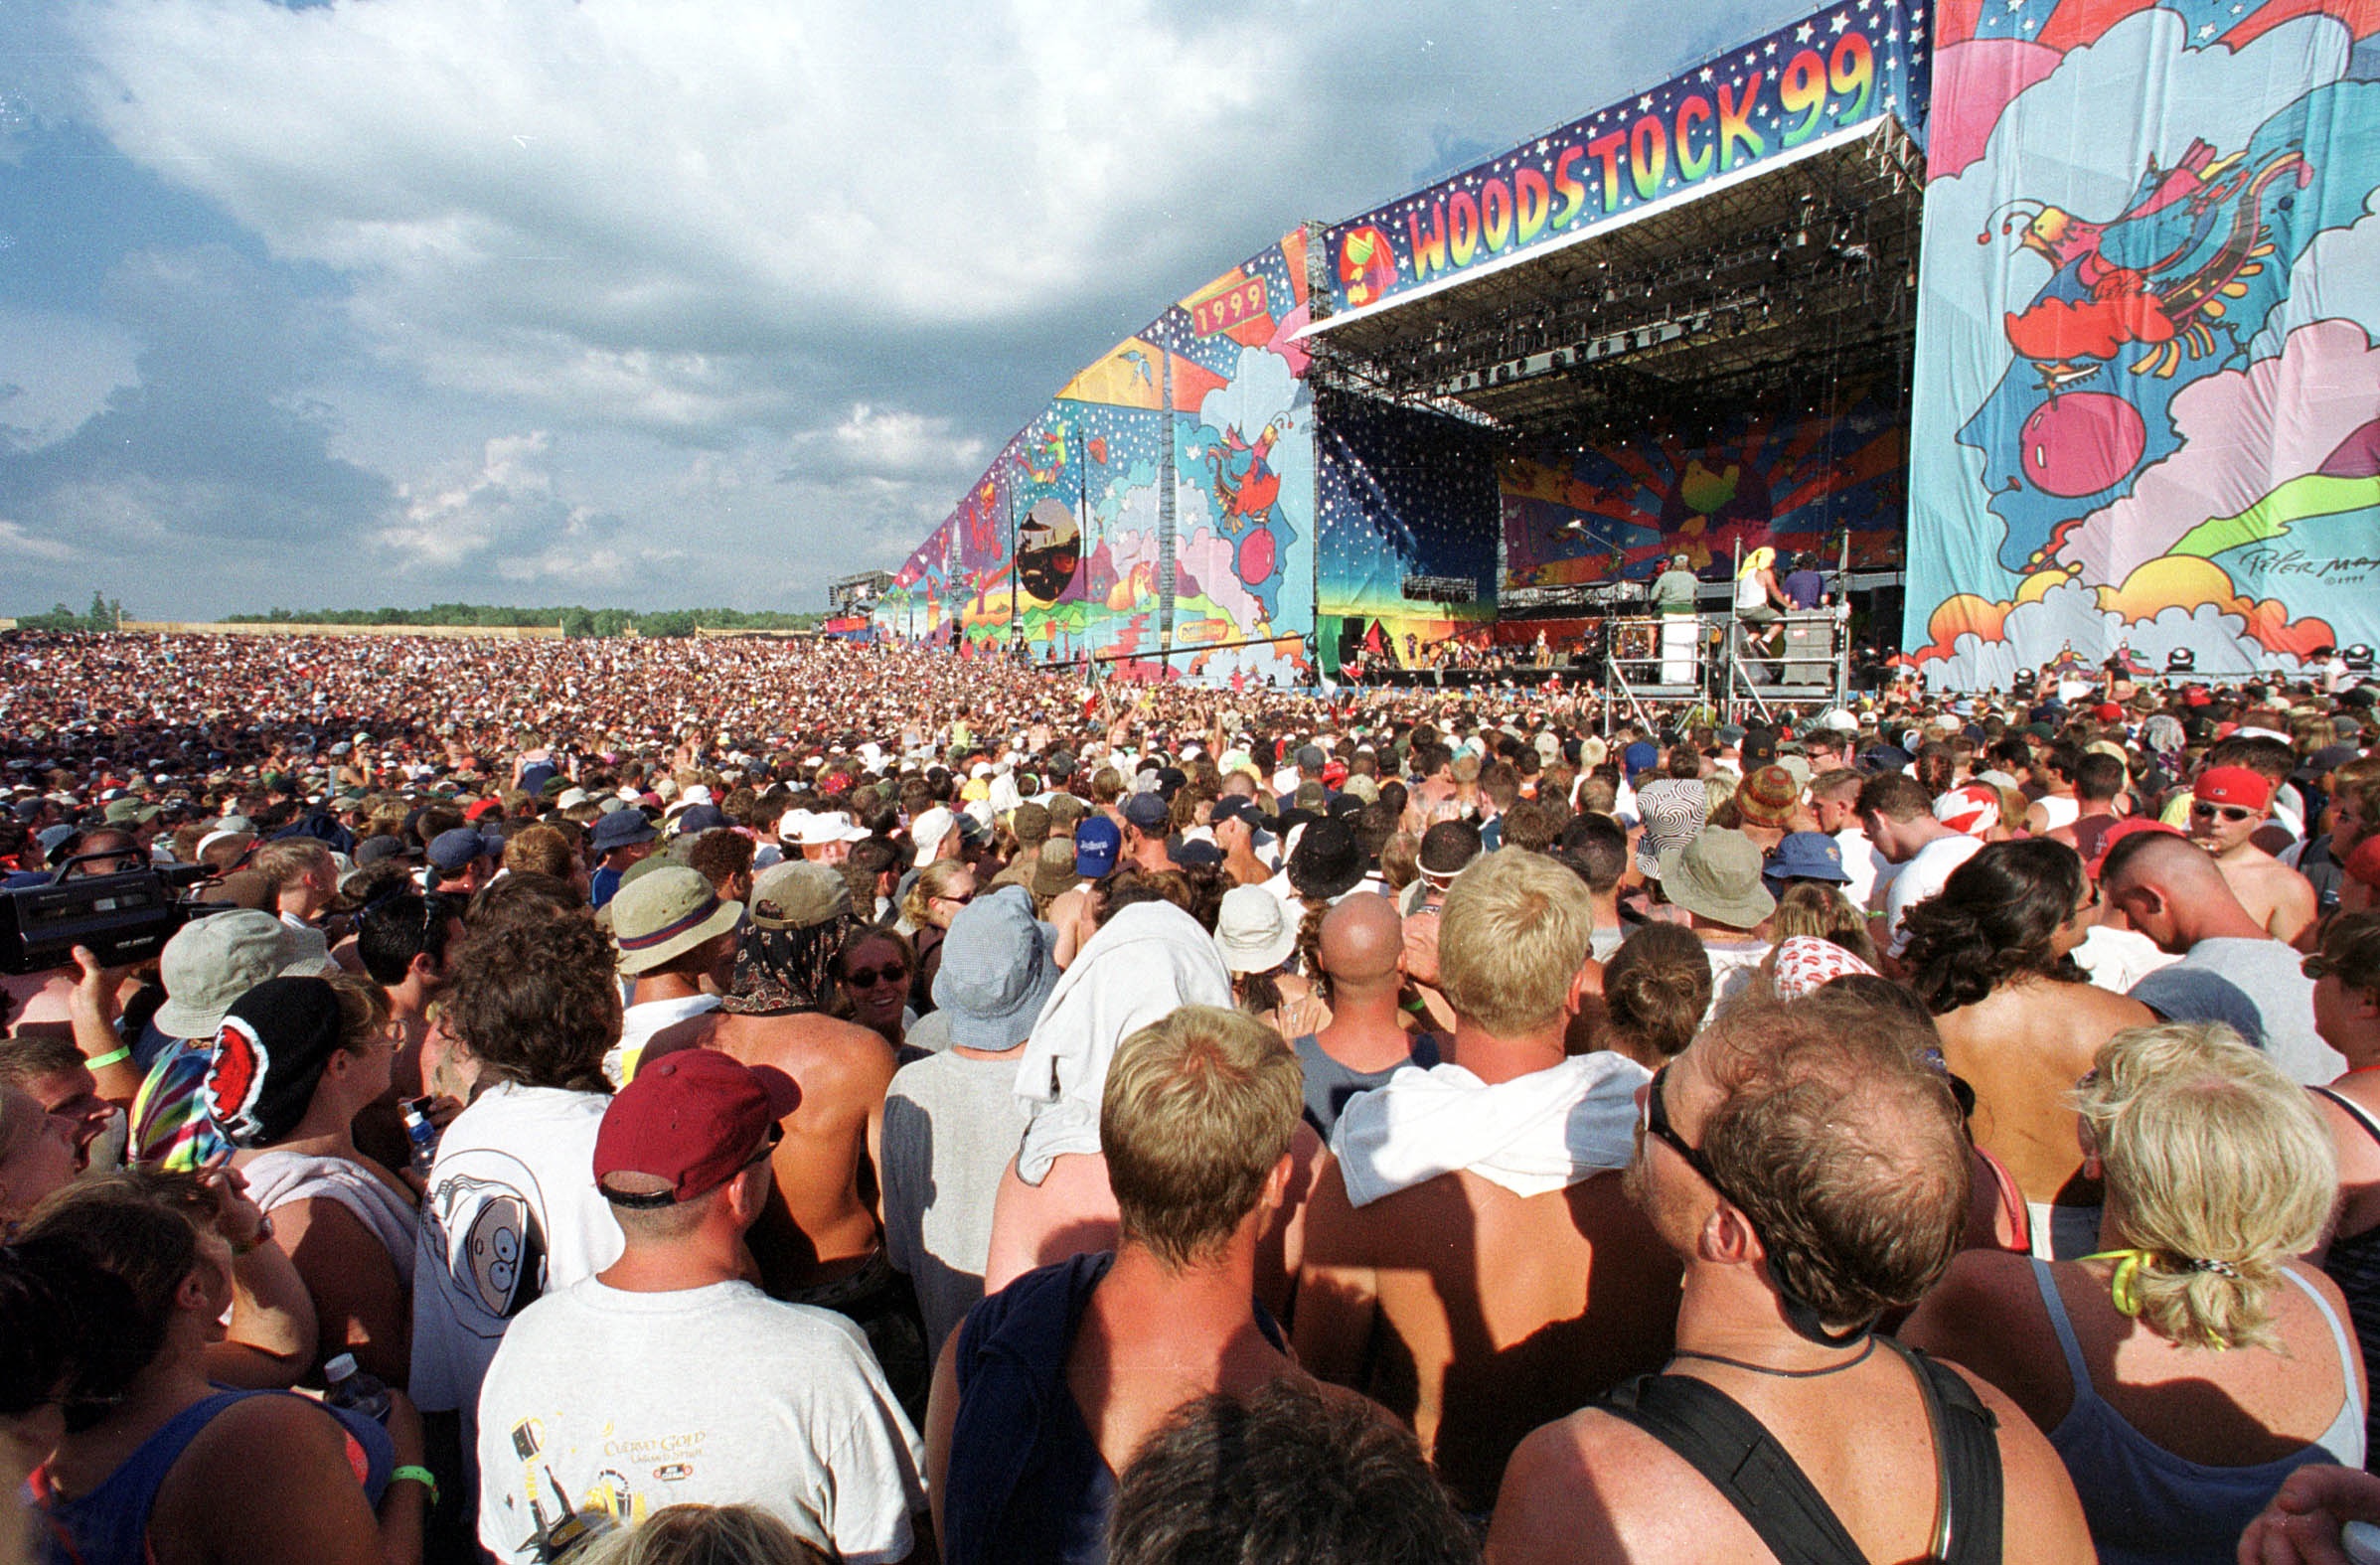 Woodstock 99 Spins Live Report From the Music Festival